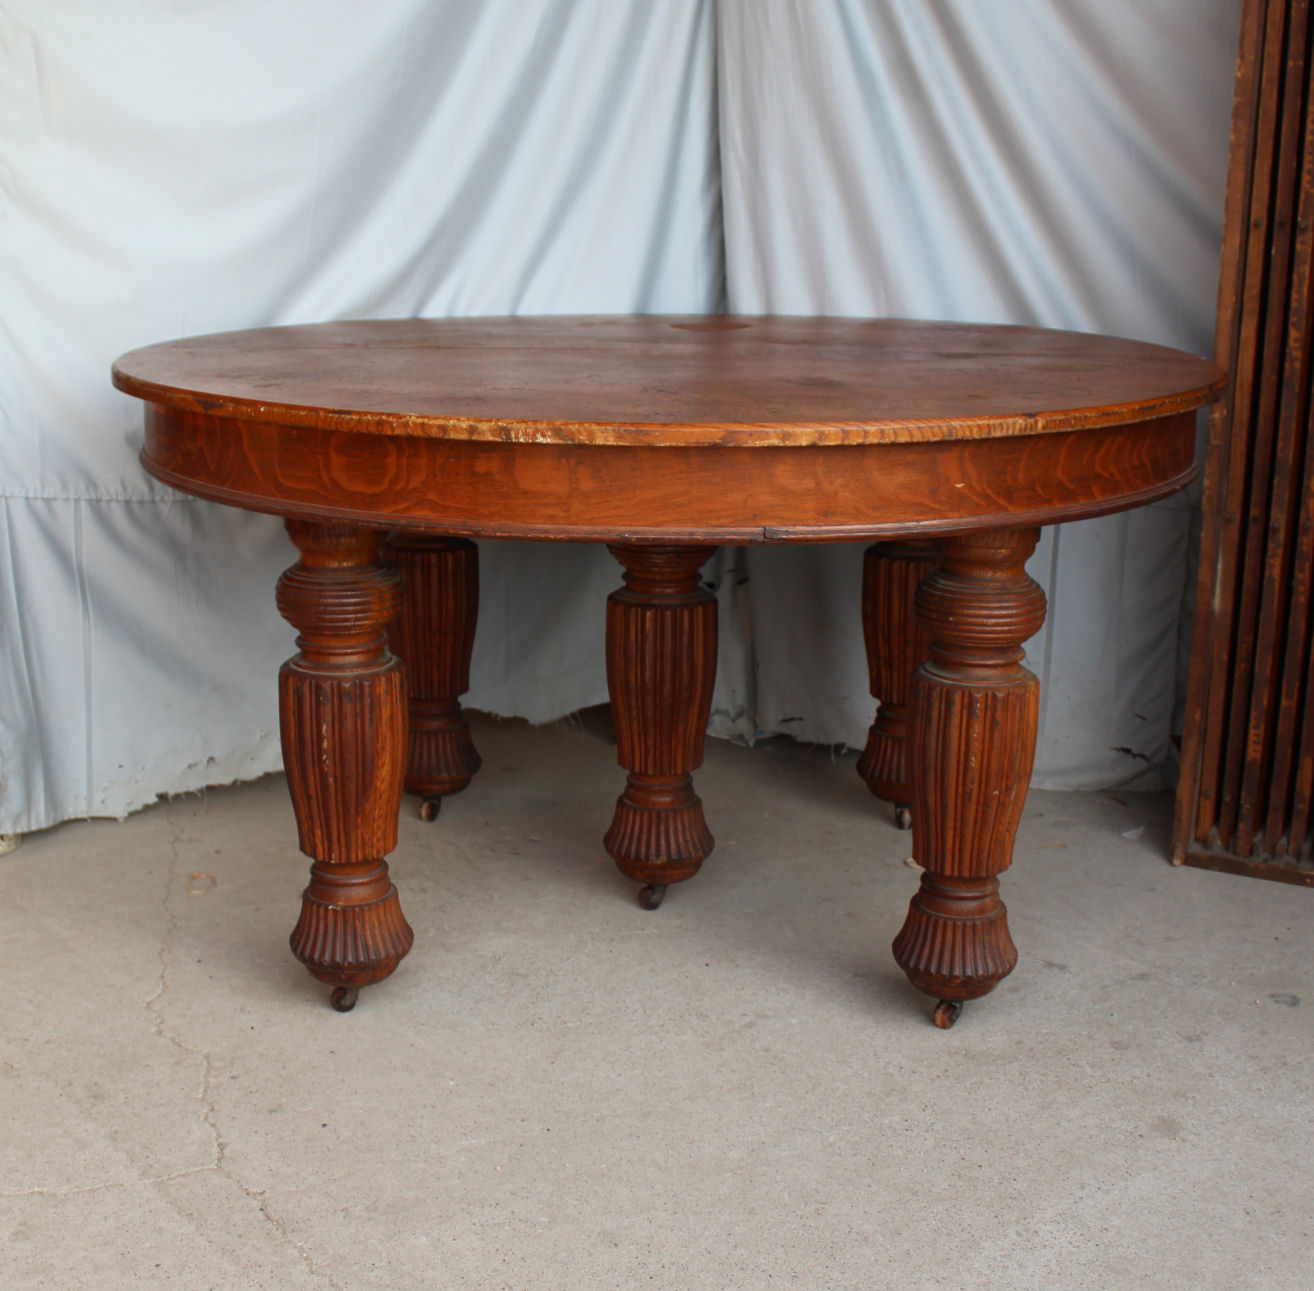 Bargain John S Antiques Antique Round, Round Oak Tables With Leaves